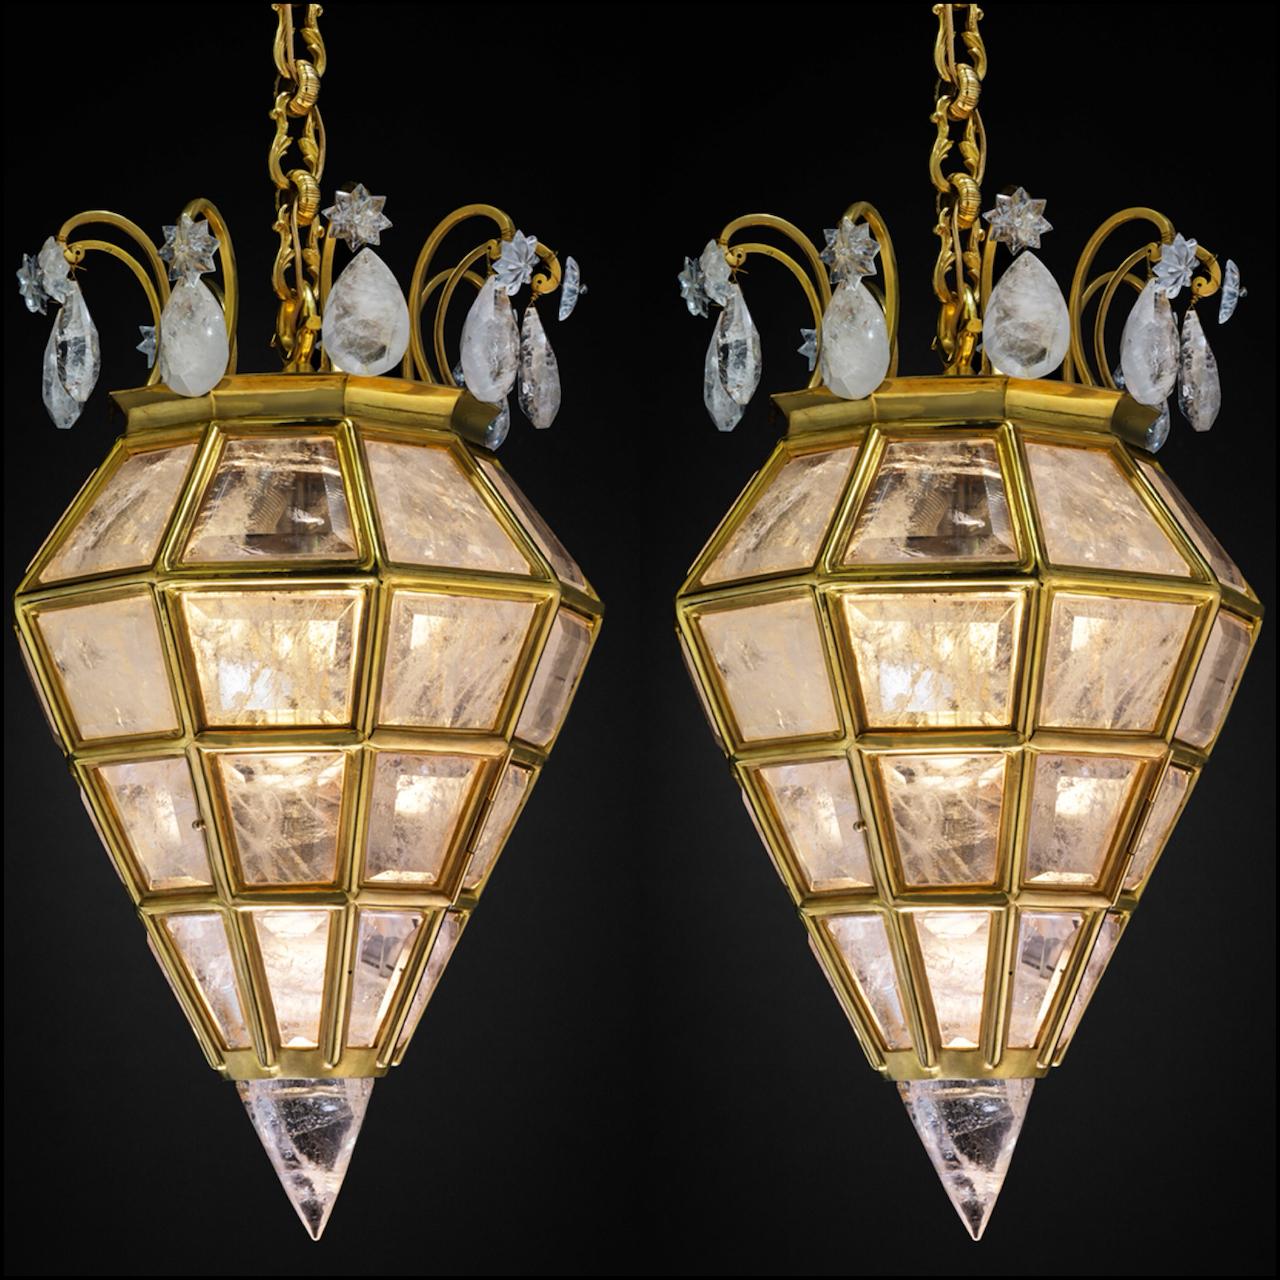 Rock crystal quartz and 24-karat gilding ormolu bronze lighting by Alexandre Vossion.
This rock crystal lighting is made in France.
The fixture, the chain and the canopy of this rock crystal lantern are handmade in bronze.
Each workers who